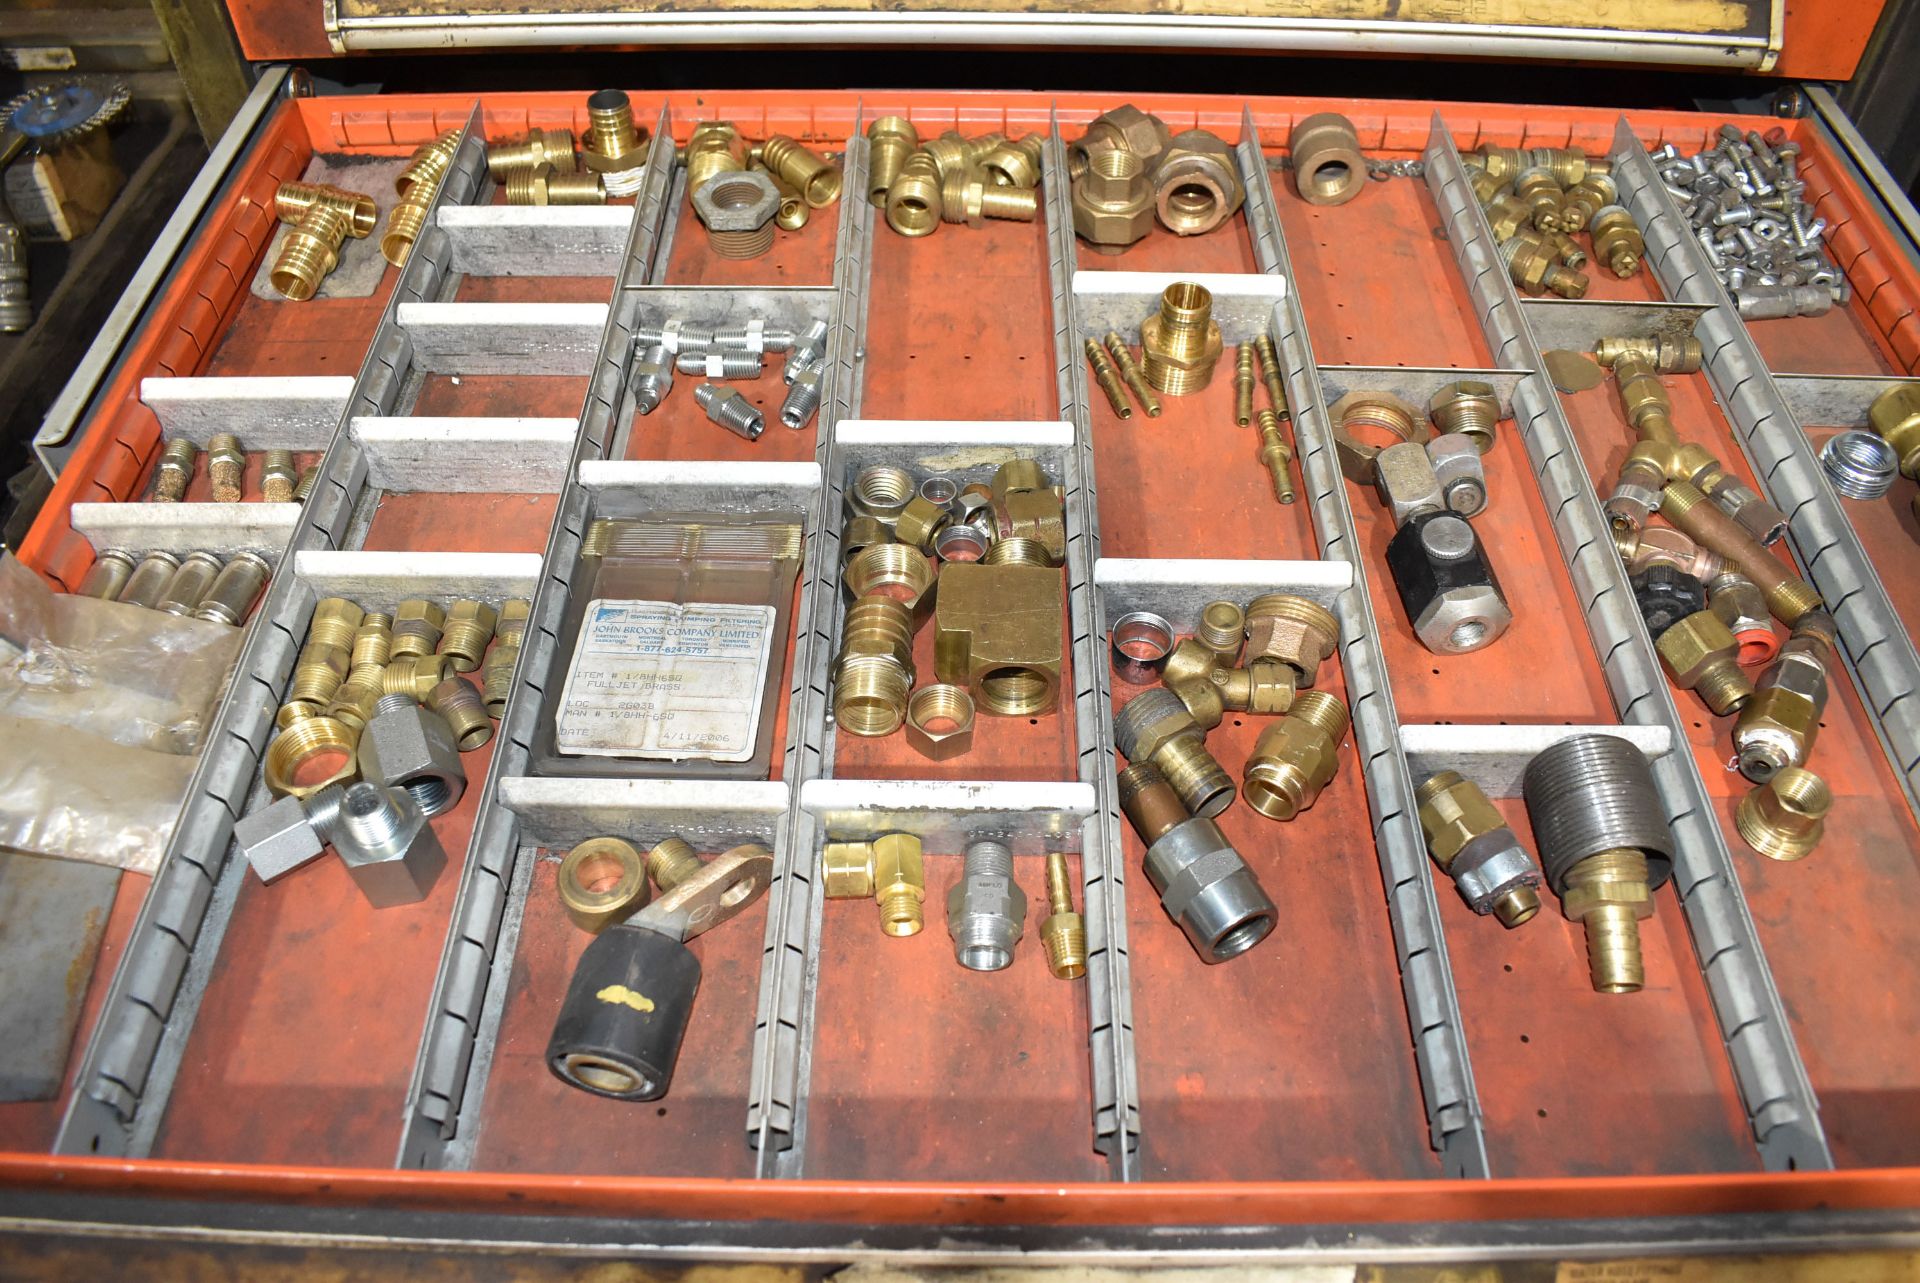 LOT/ CONTENTS OF TOOL CABINET - INCLUDING FITTINGS, FITTING CLAMPS, SPARE PARTS, TAPS & DIES, - Image 5 of 14